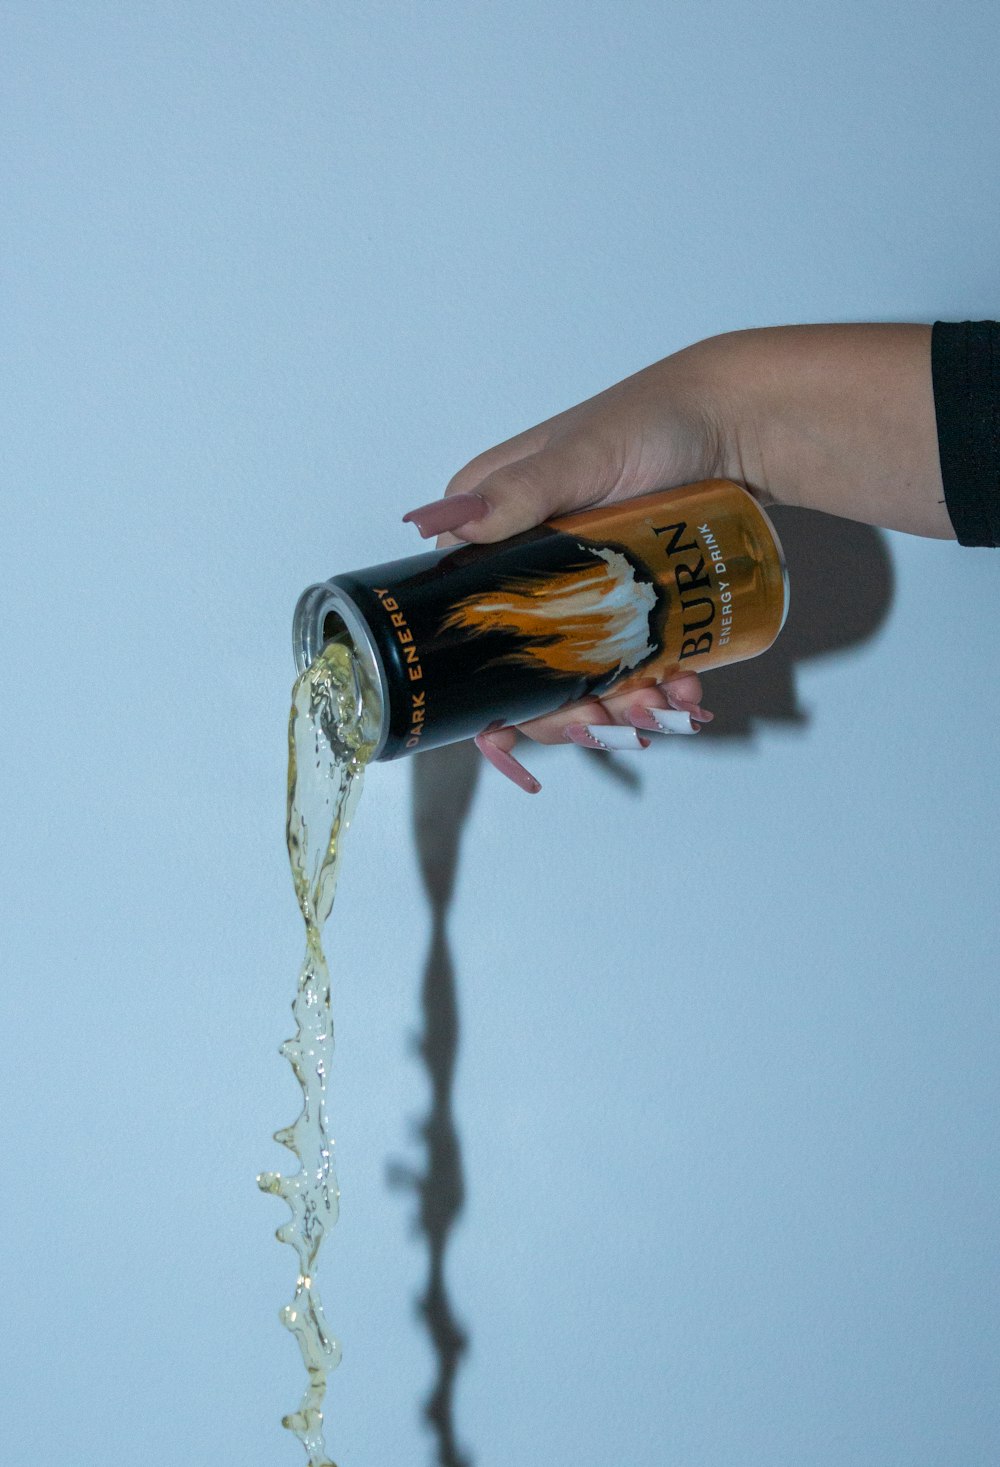 a person is pouring something into a can